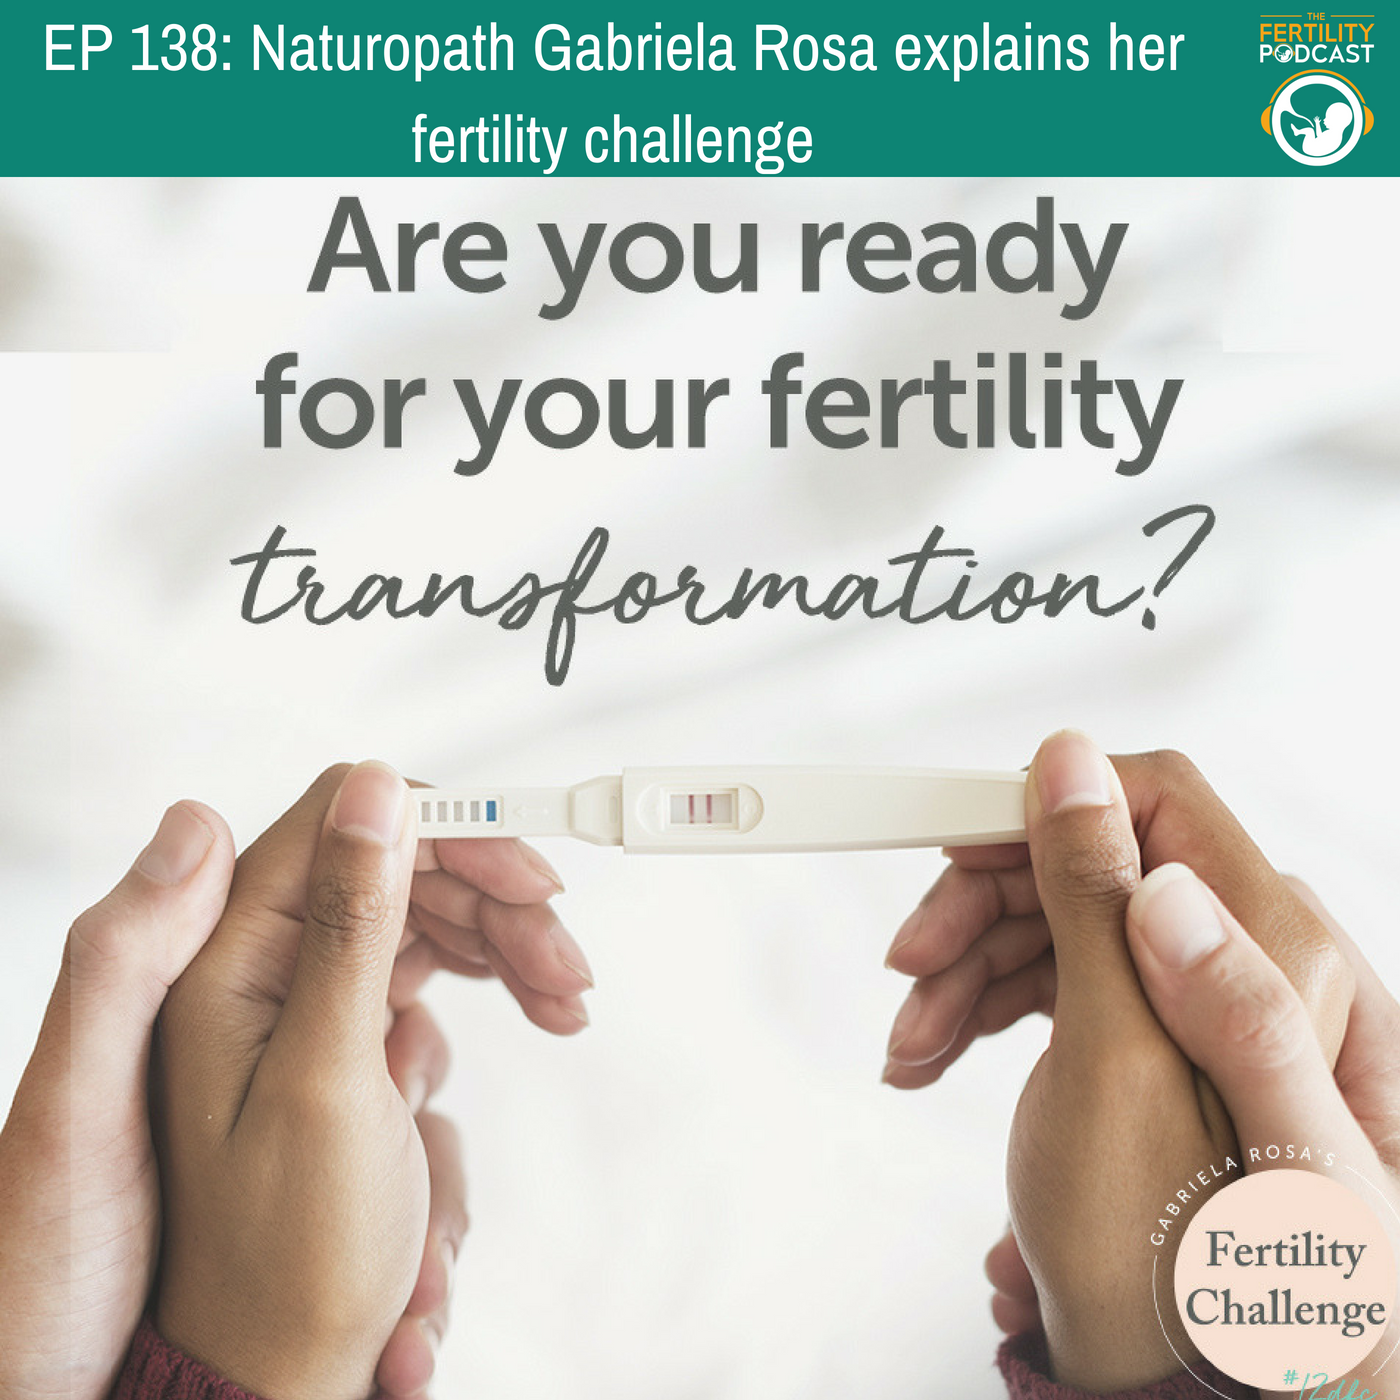 Can a Naturopath help me conceive? Gabriela Rose talks about her work